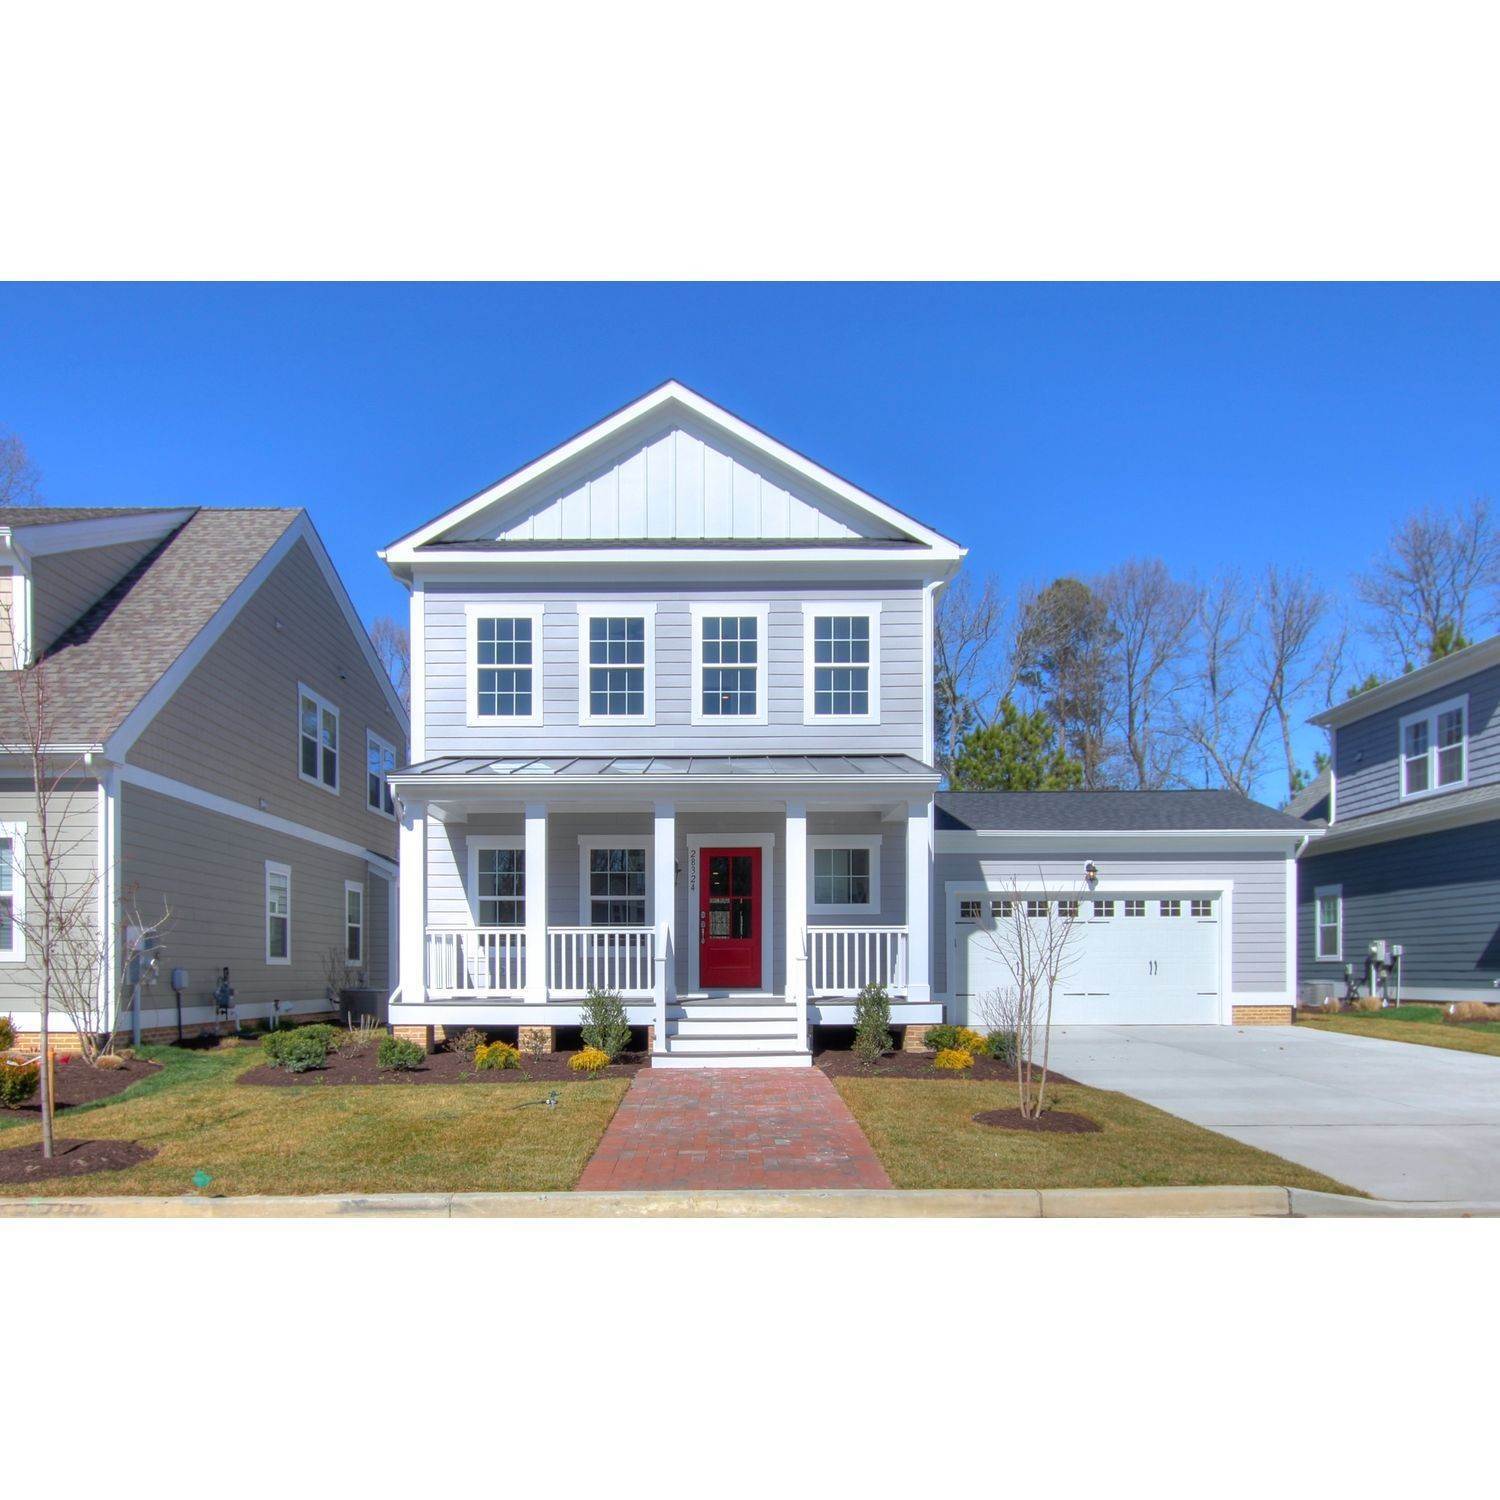 6. Covell Signature Homes building at 110 Channel Marker Way, Grasonville, MD 21638